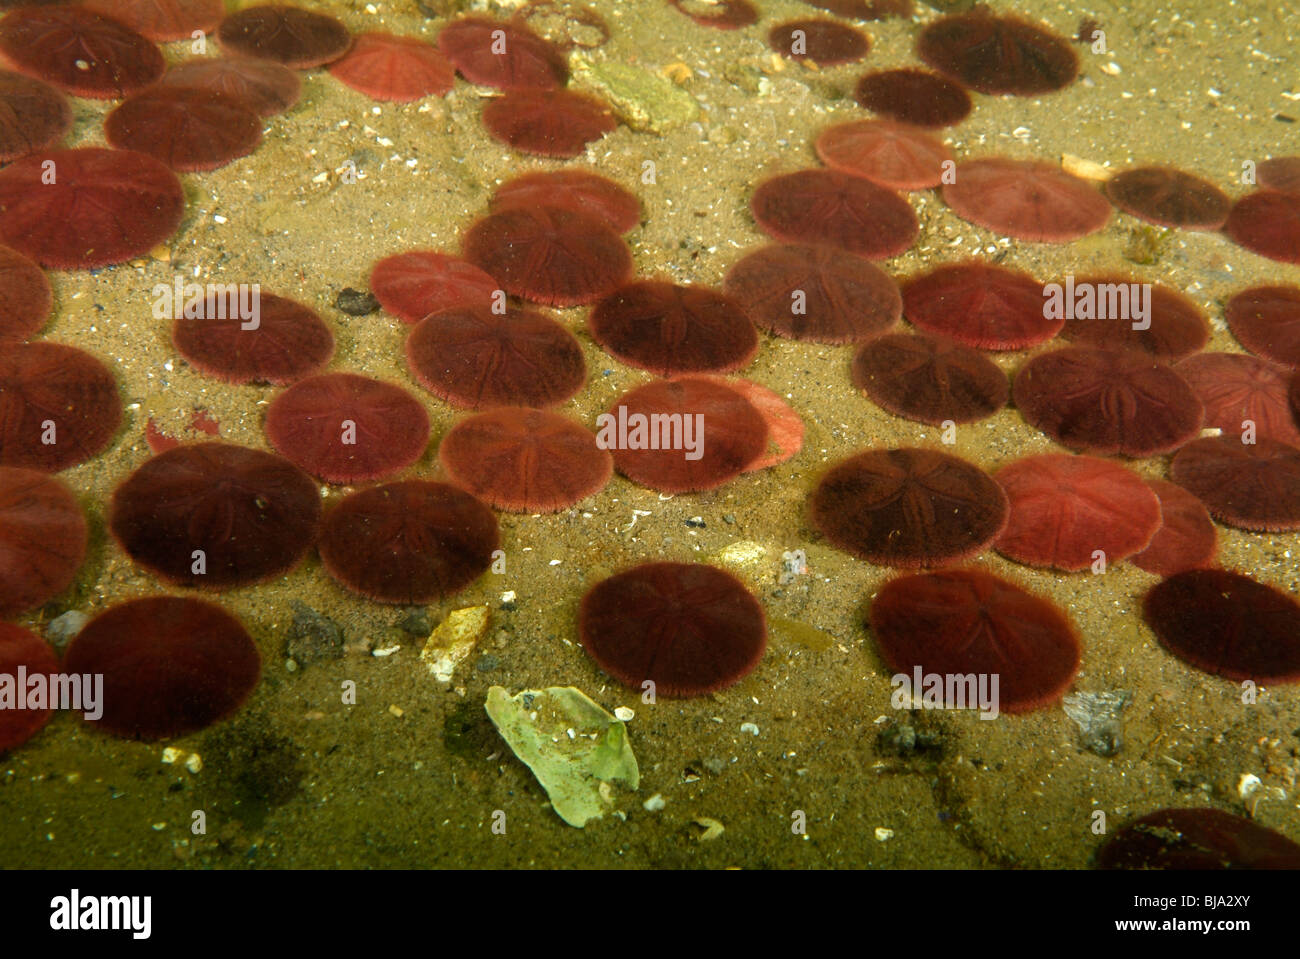 Field of common sand dollars on the sand, Gulf of St Lawrence Stock Photo